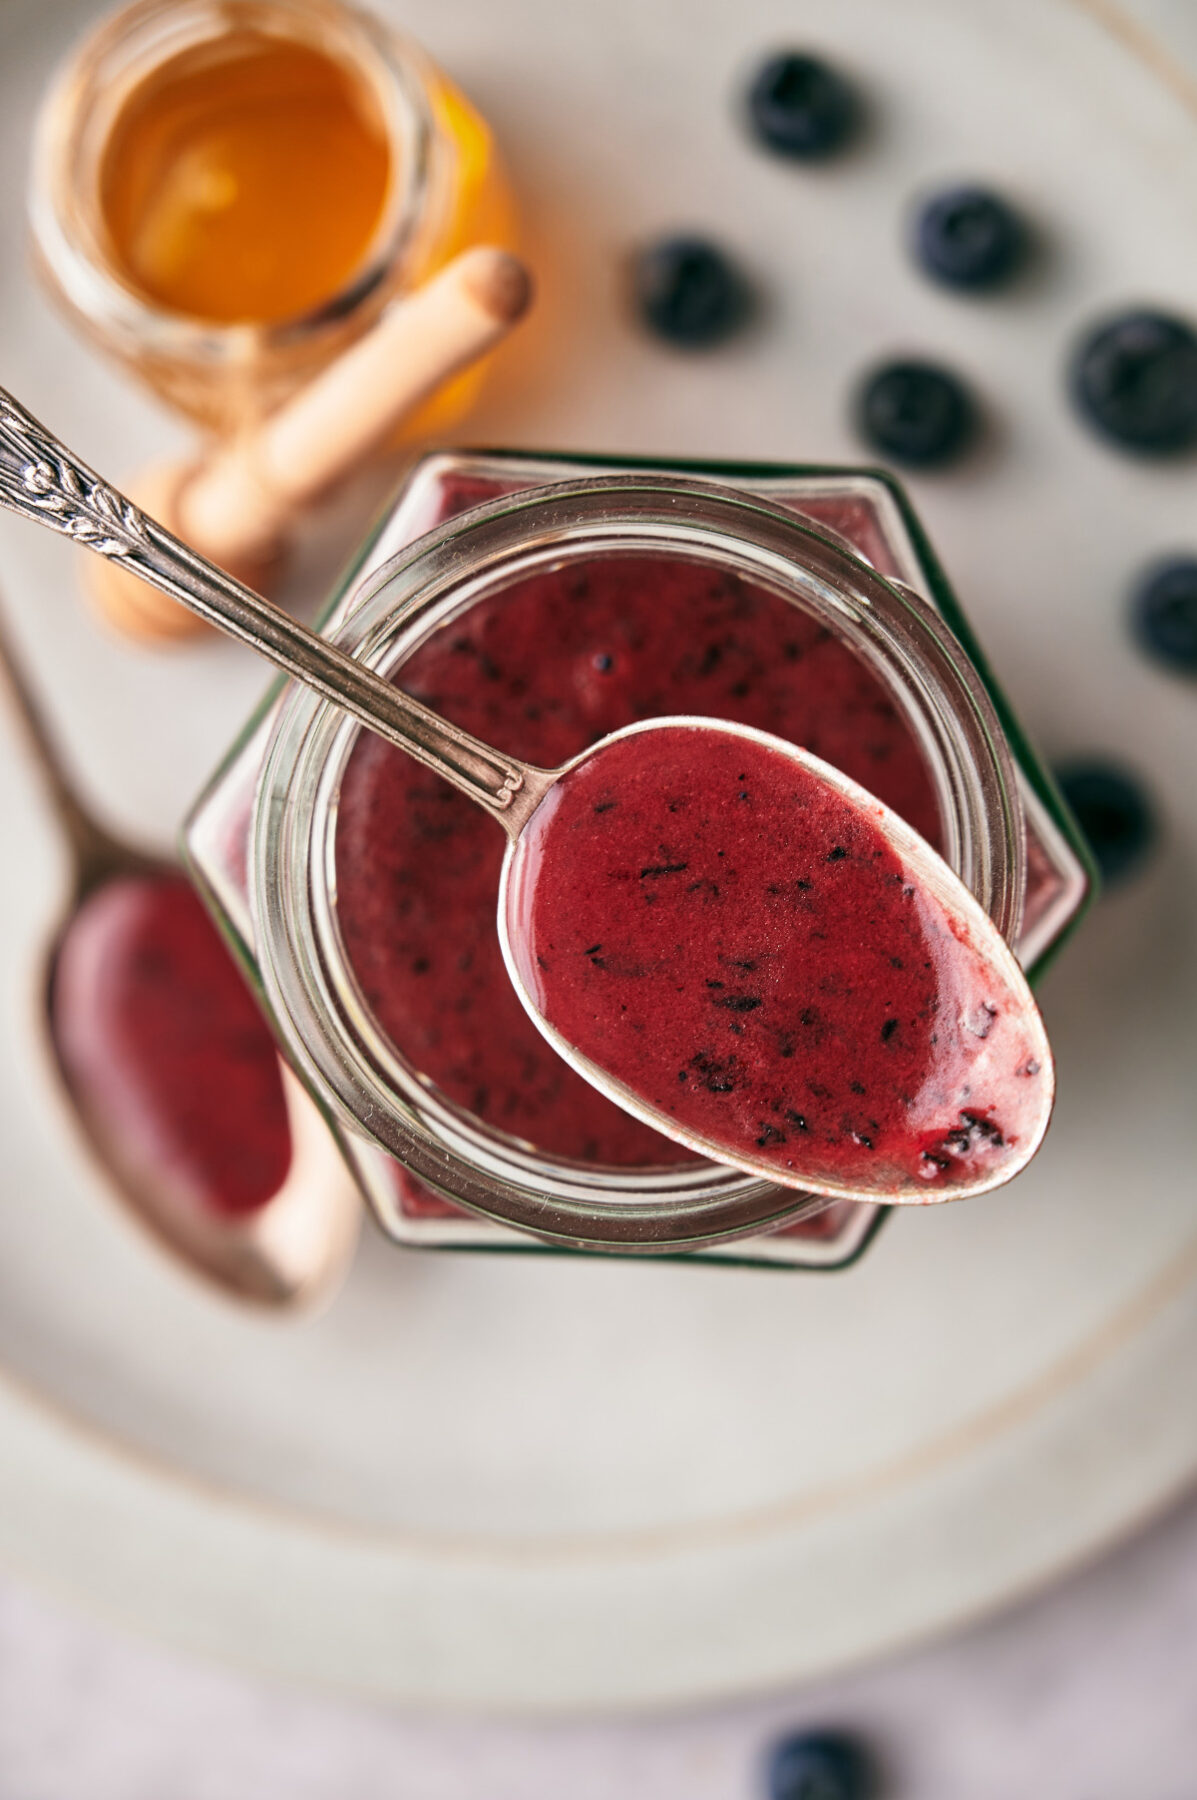 Top view of Blueberry Vinaigrette on a spoon, vertical orientation.